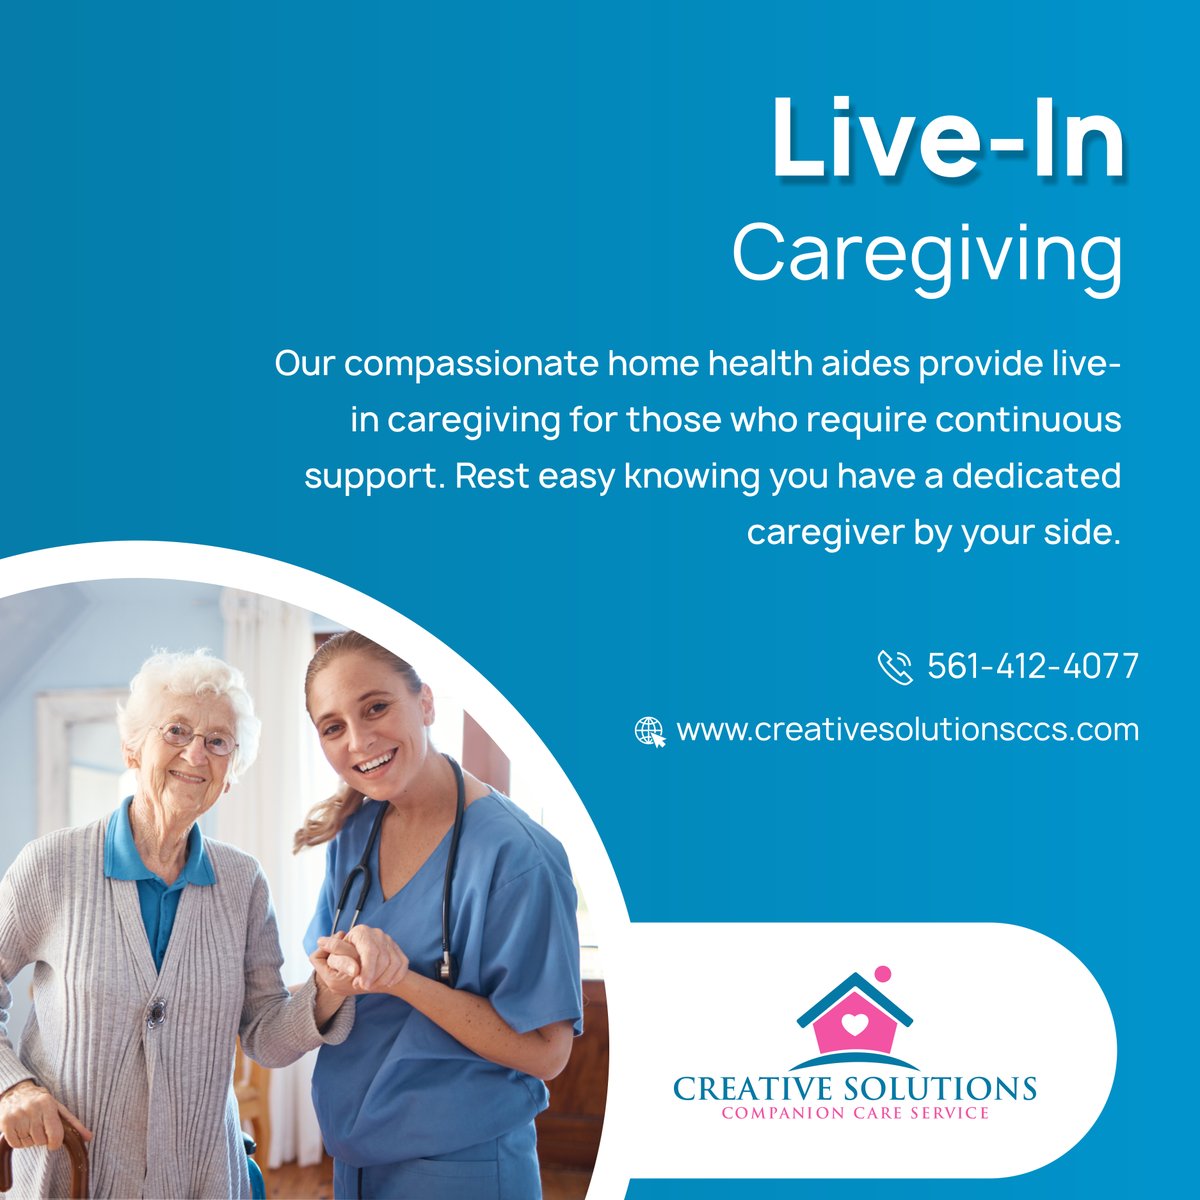 When you need round-the-clock care, we're here for you. Contact us for caregiving, nursing, and health care needs, and experience the comfort and security of live-in caregiving.

#PalmBeachHomeHealthCare #MiamiHomeHealthCare #WestPalmBeachFL #LiveInCaregiving #RoundTheClockCare